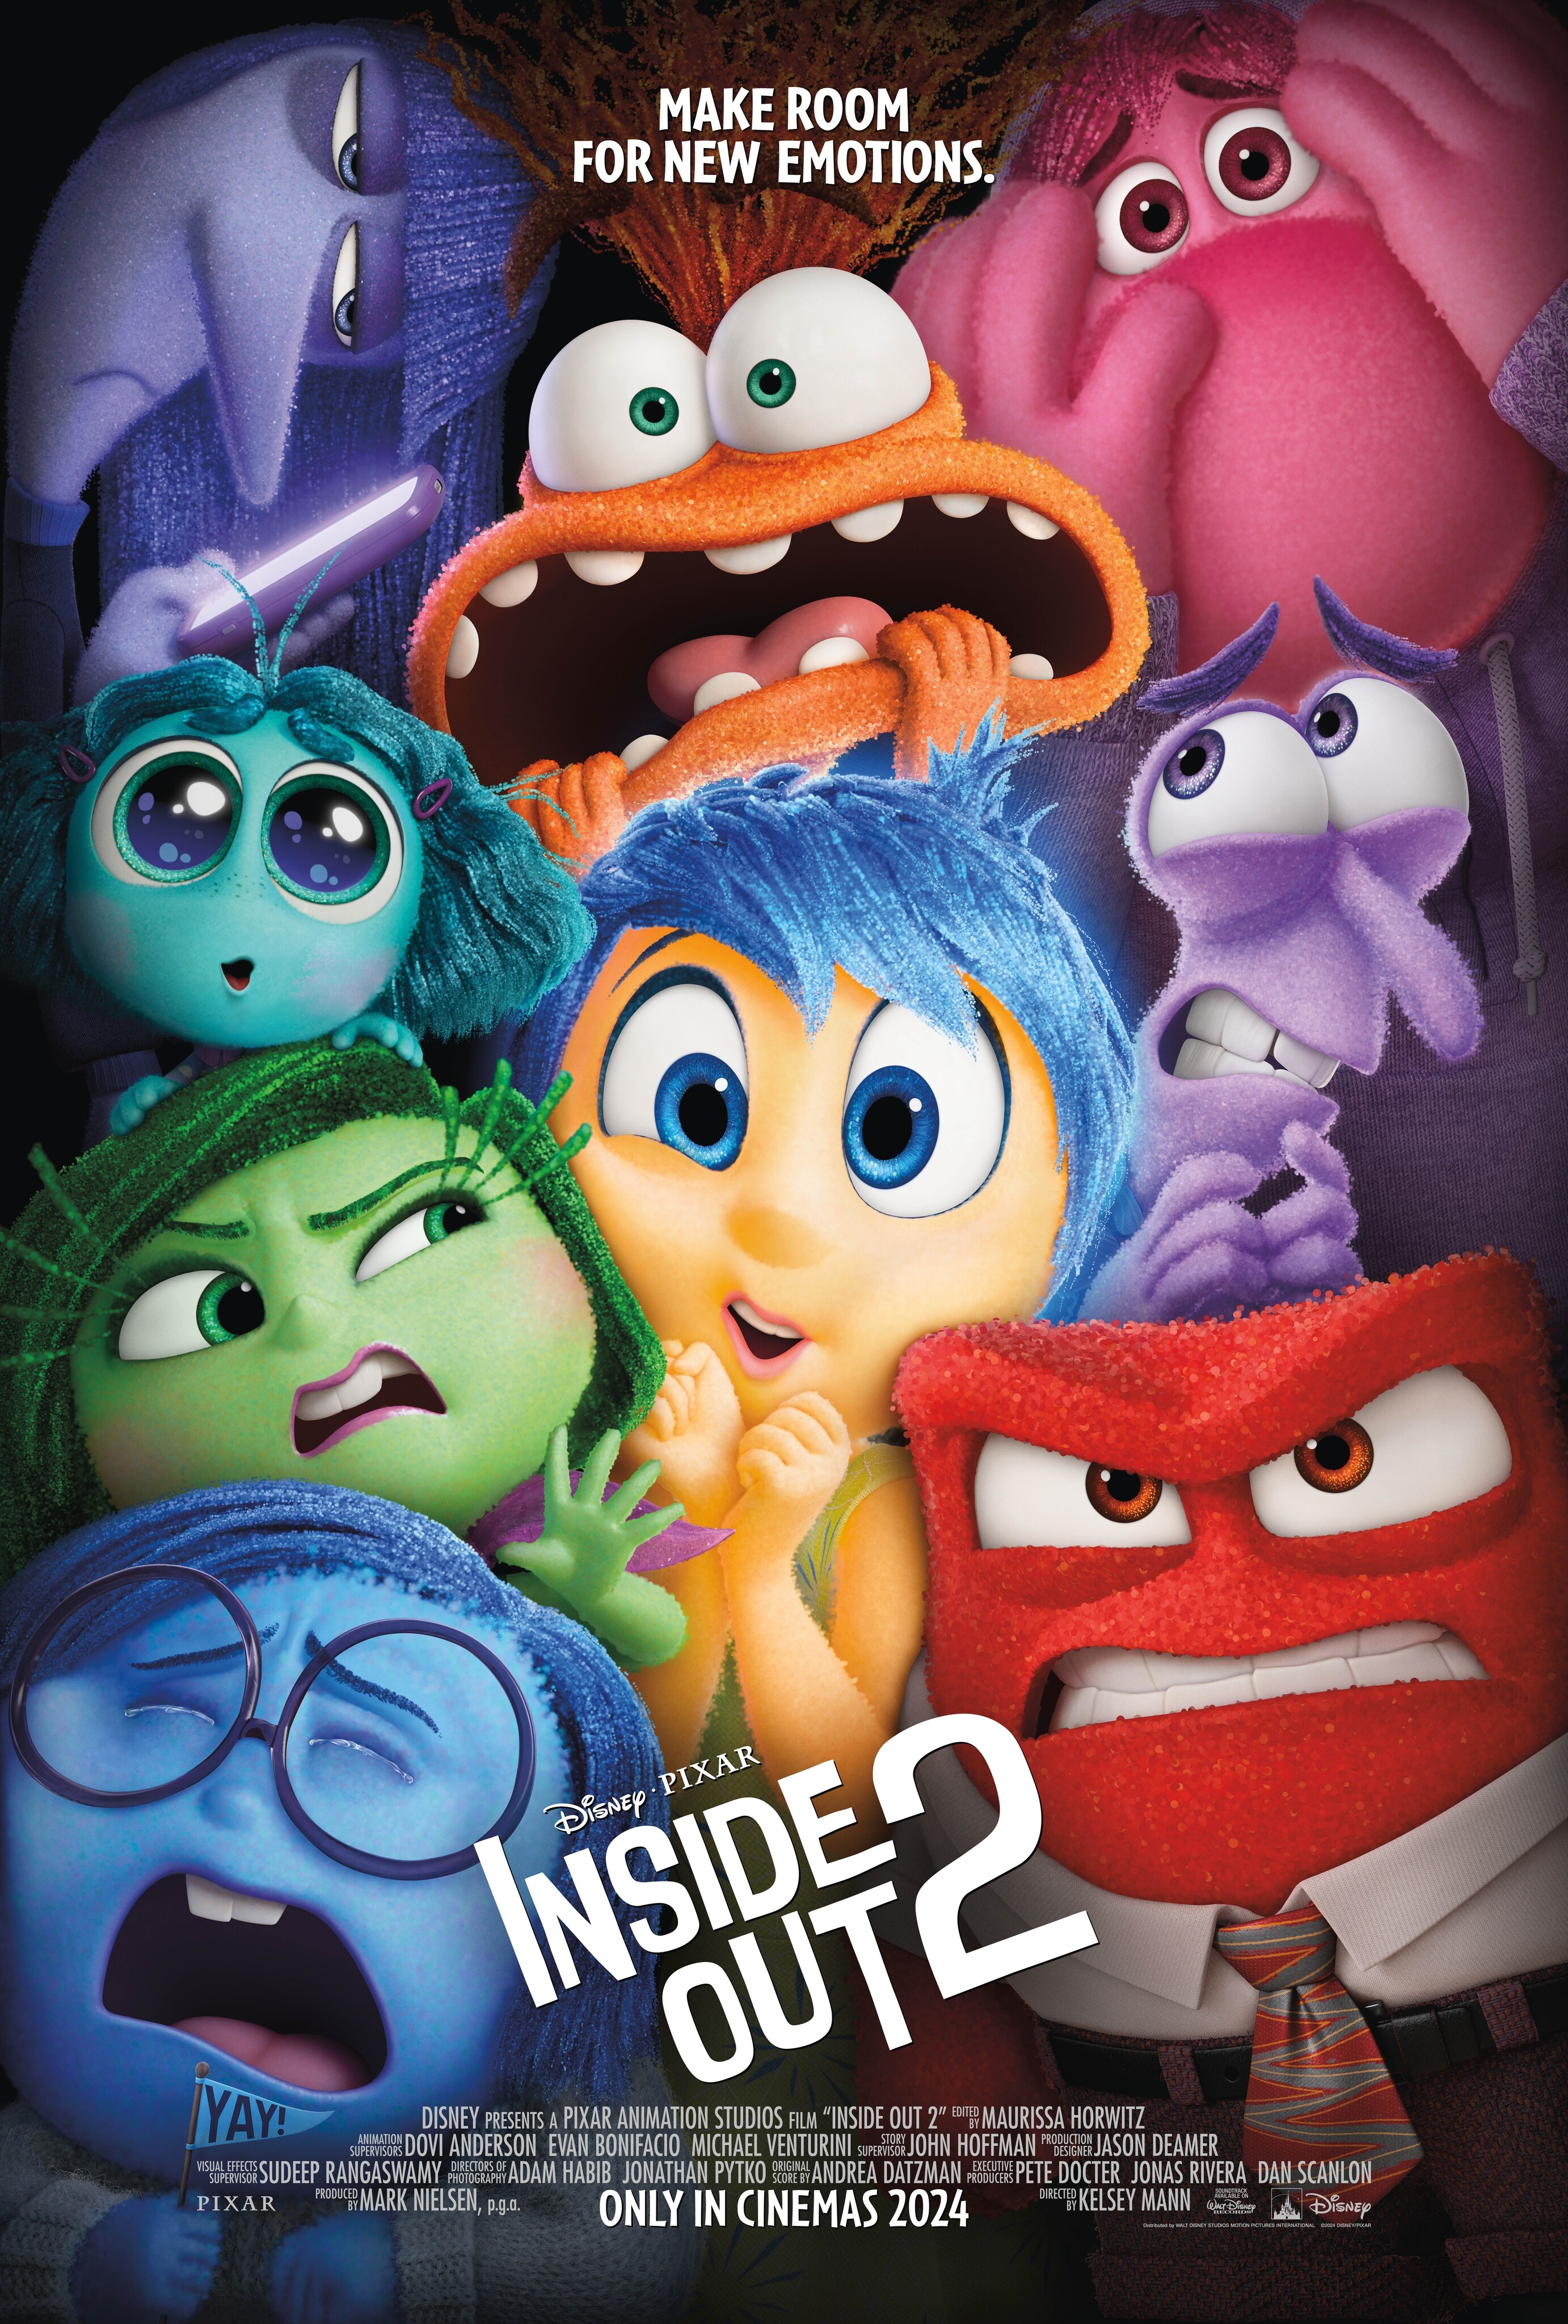 Make room for new emotions. | Disney•Pixar | Inside Out 2 | Only in theaters June 13 | movie poster